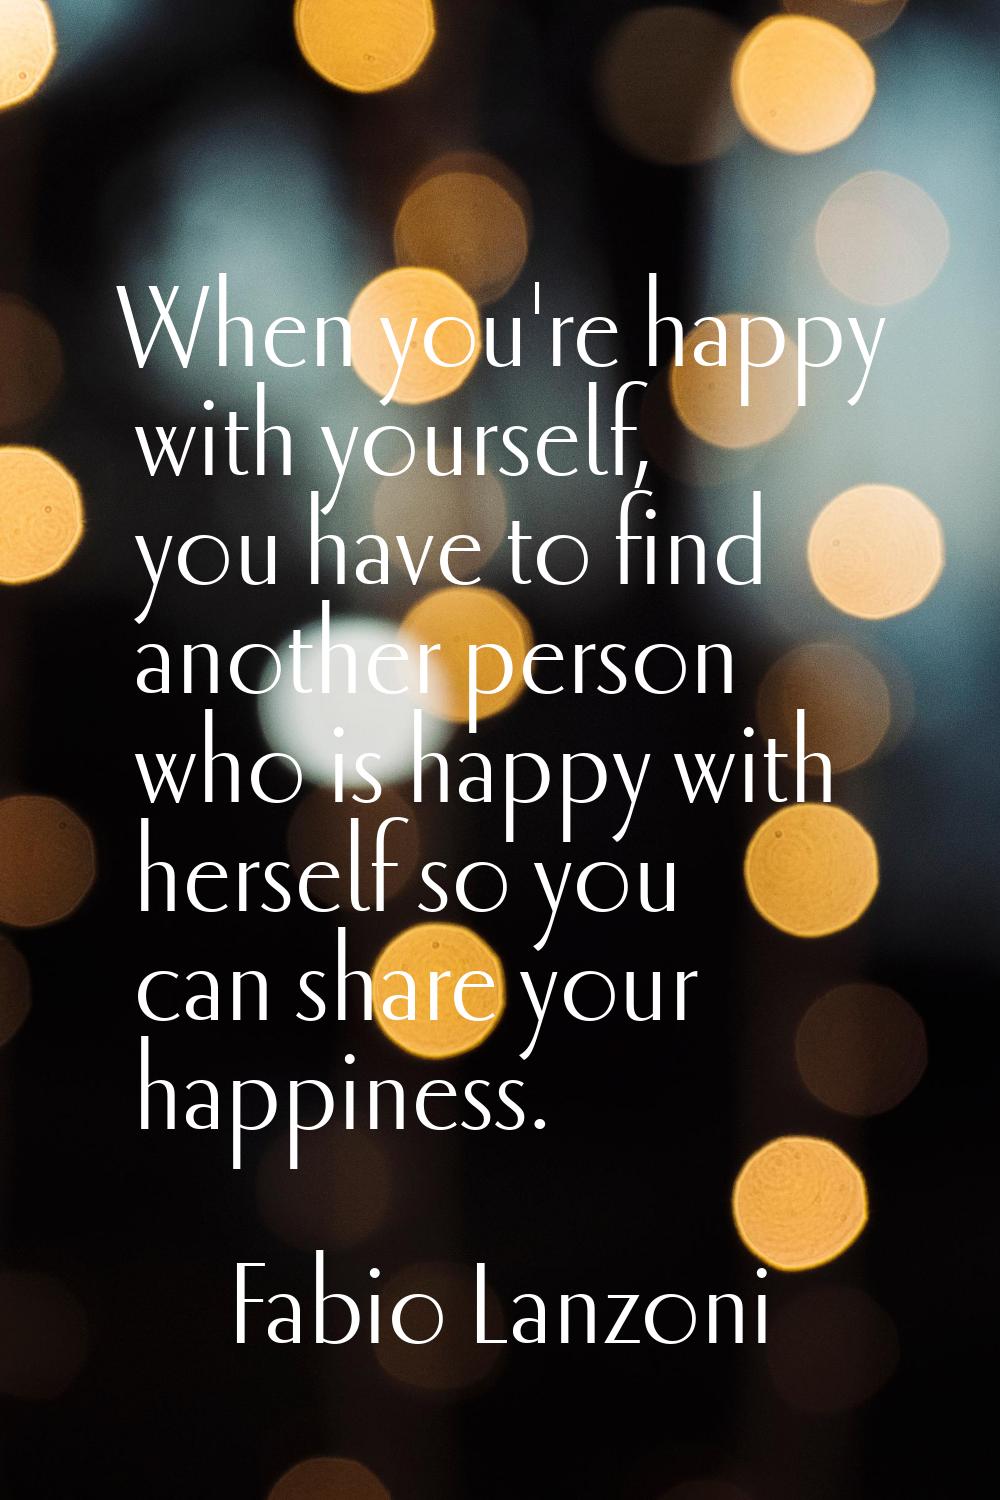 When you're happy with yourself, you have to find another person who is happy with herself so you c